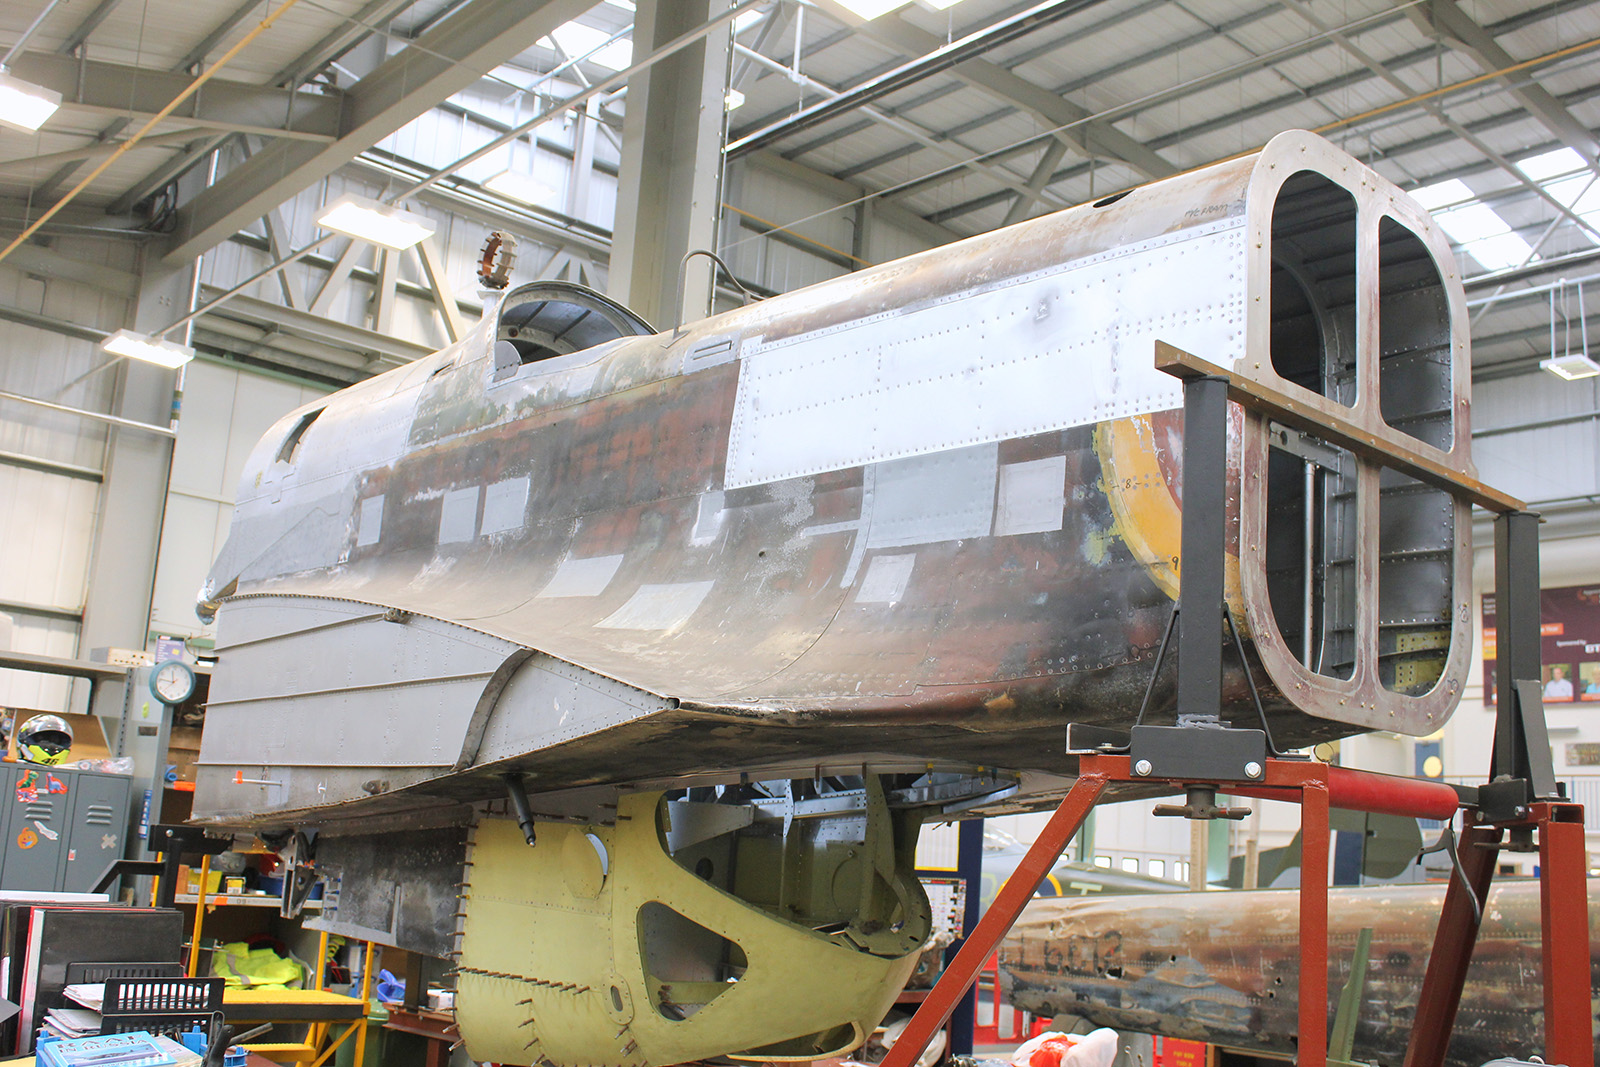 P1344’s rear fuselage section in its jig and almost structurally complete. Notice the tail boom in the background. You can clearly read the serial number L6012 on its side. (photo by Geoff Jones)